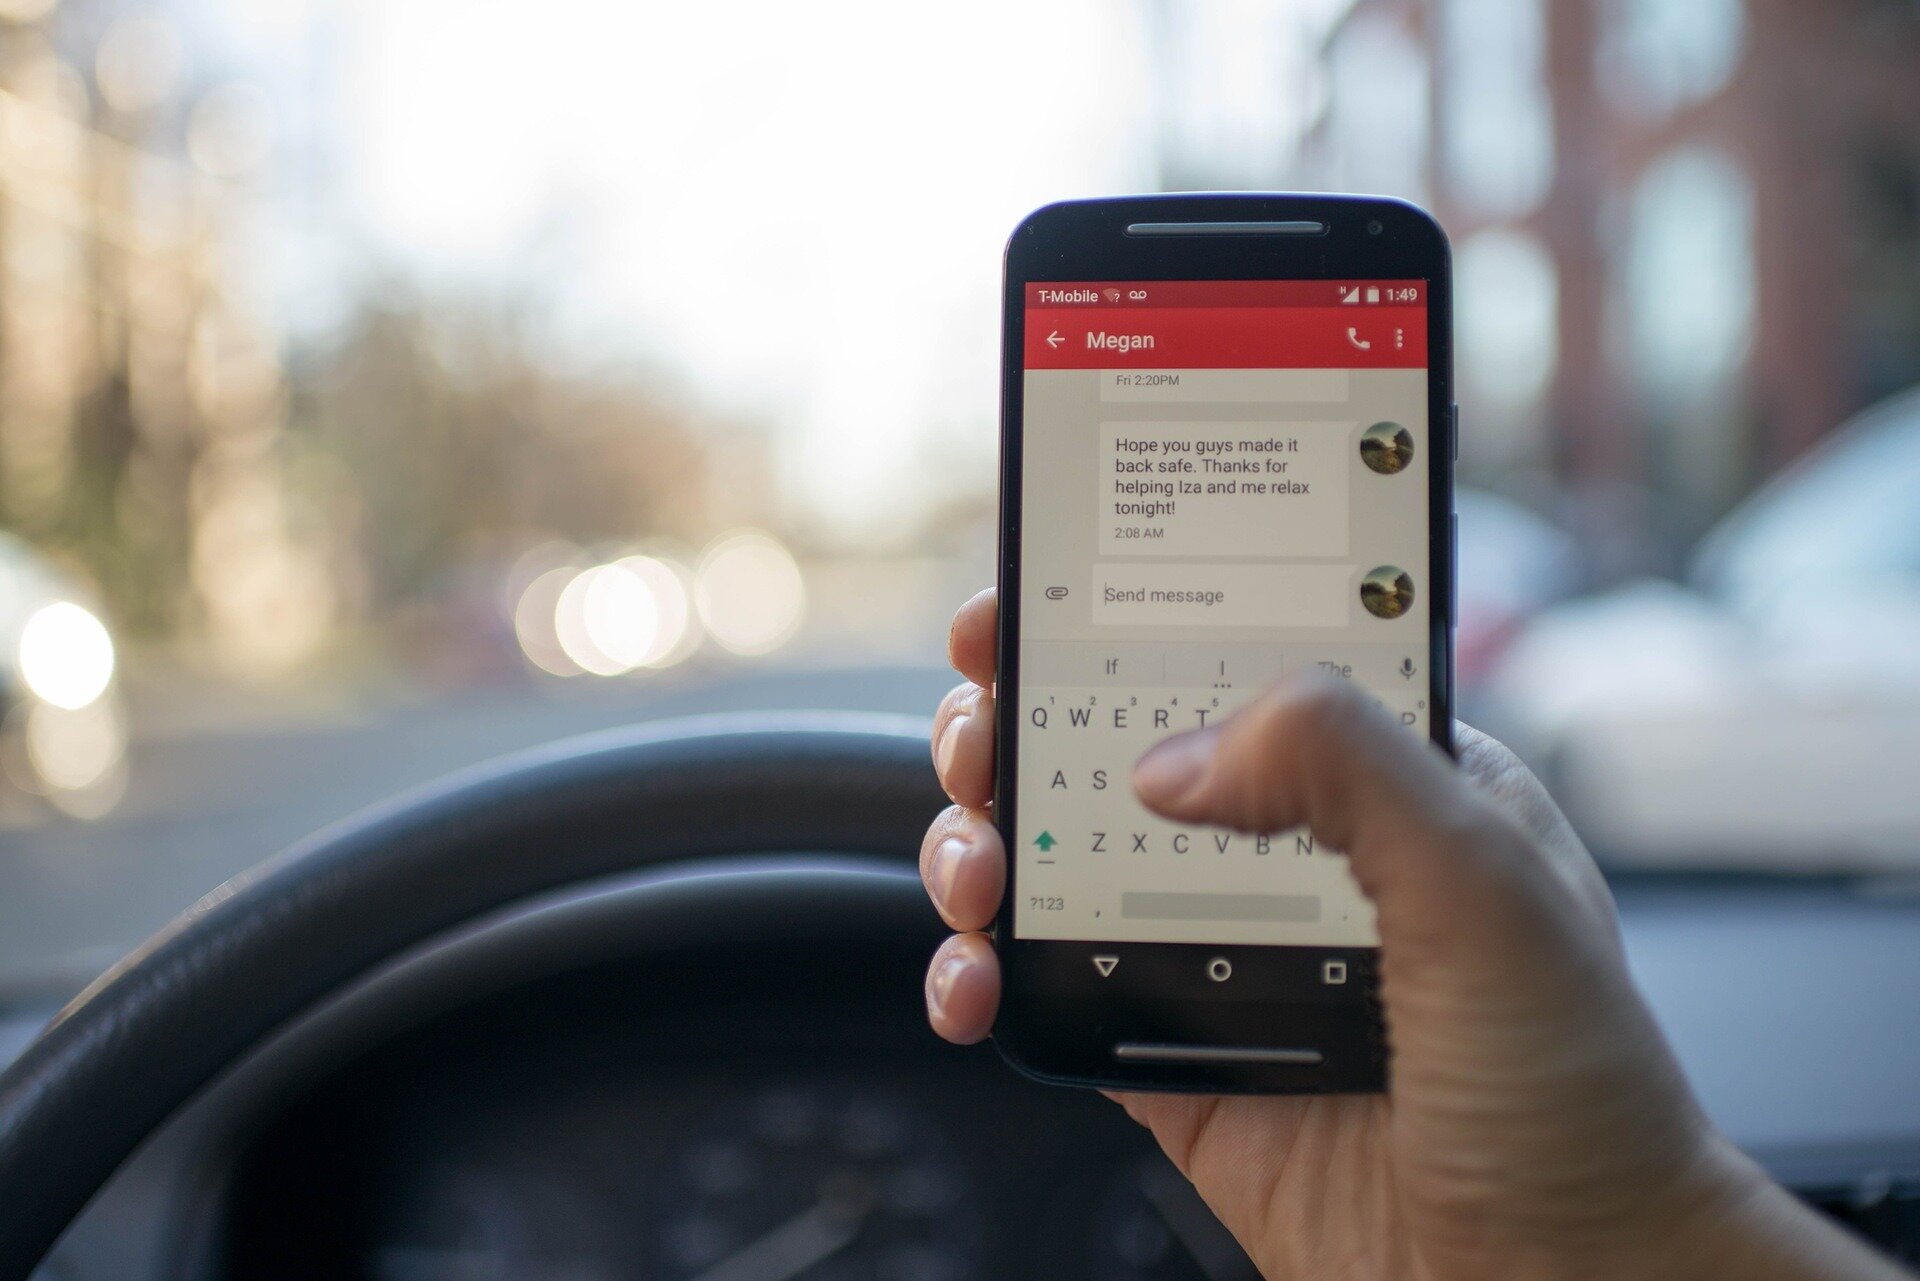 Feedback plus financial incentives reduce phone use while driving, researchers discover